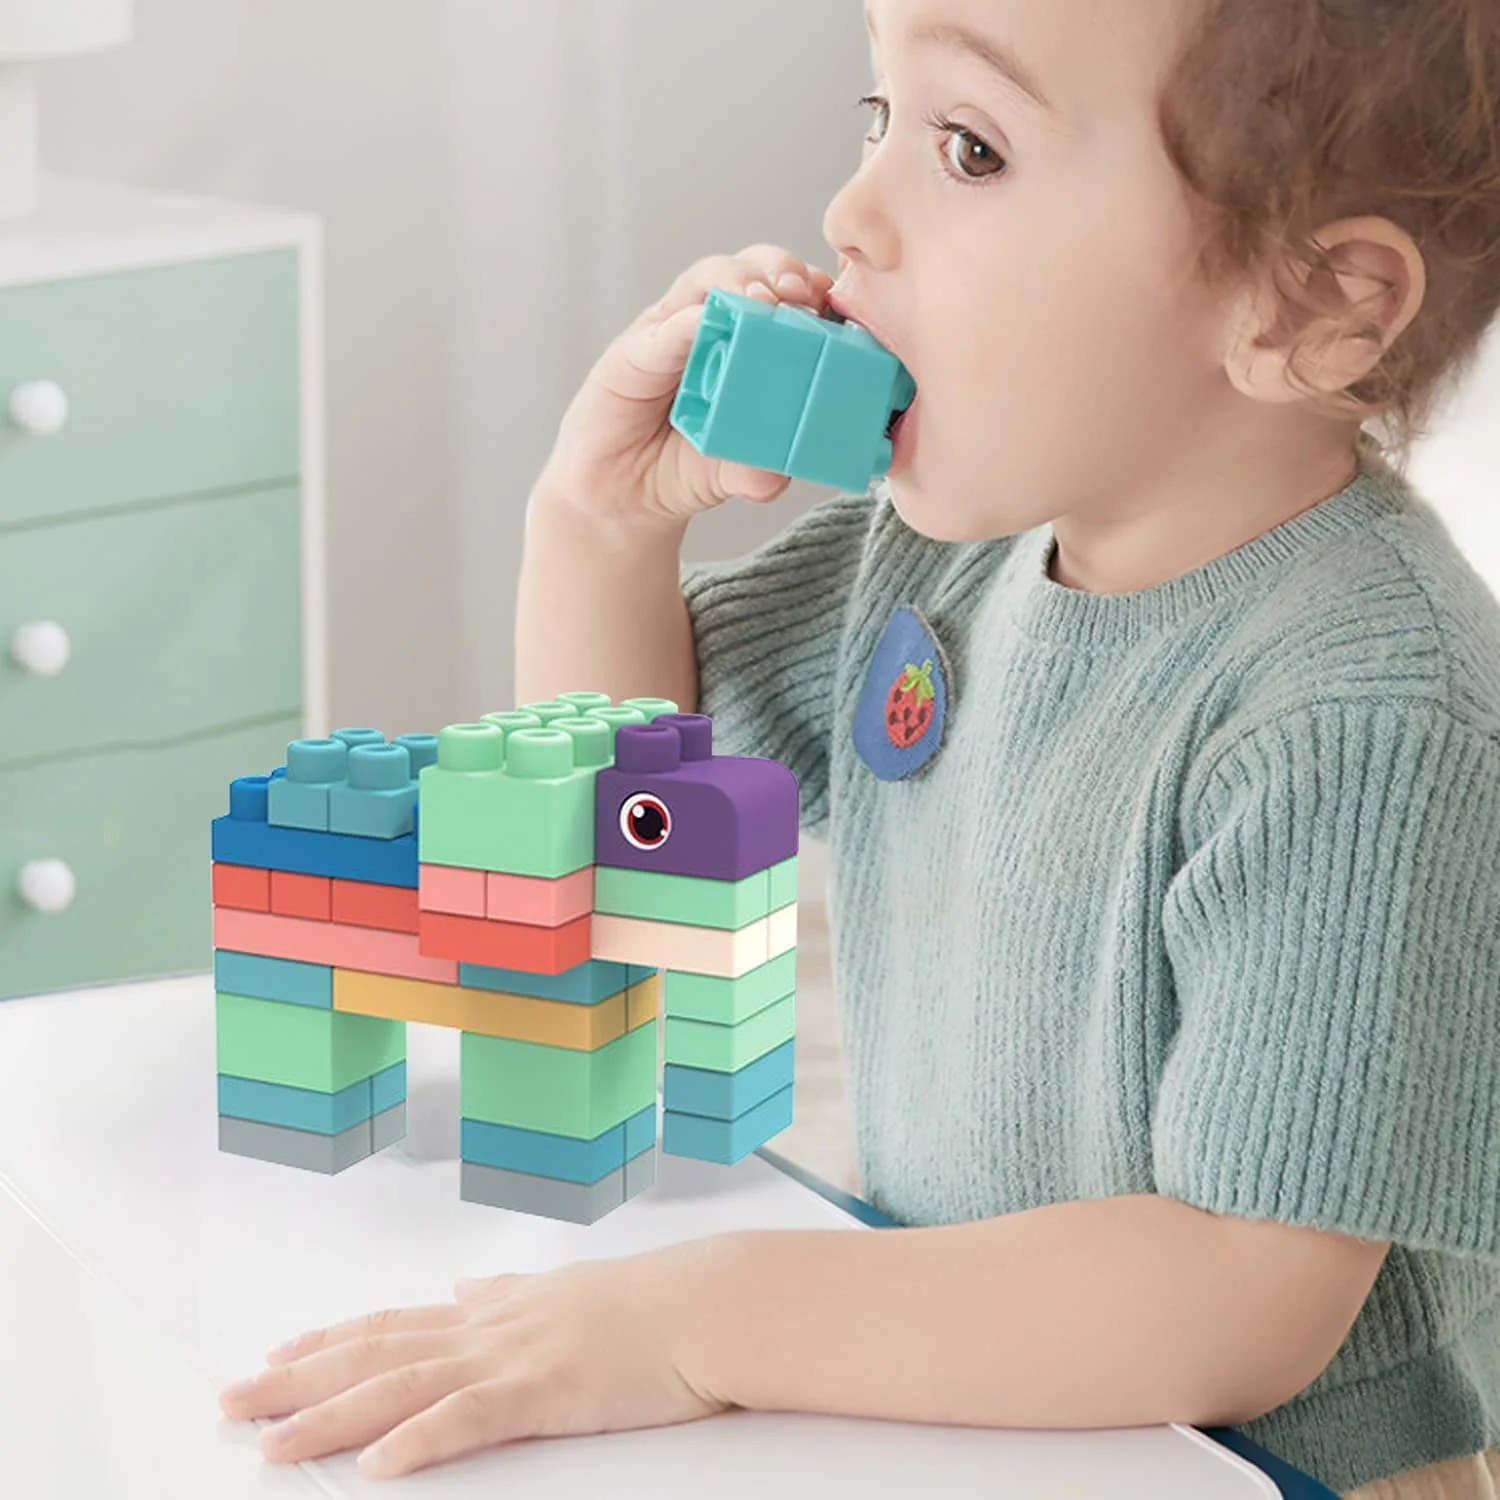 Newest Soft Building Blocks Set for Toddler Baby Ages 6 Month Old and Up Safe Playing Learning Stacking Block Toys